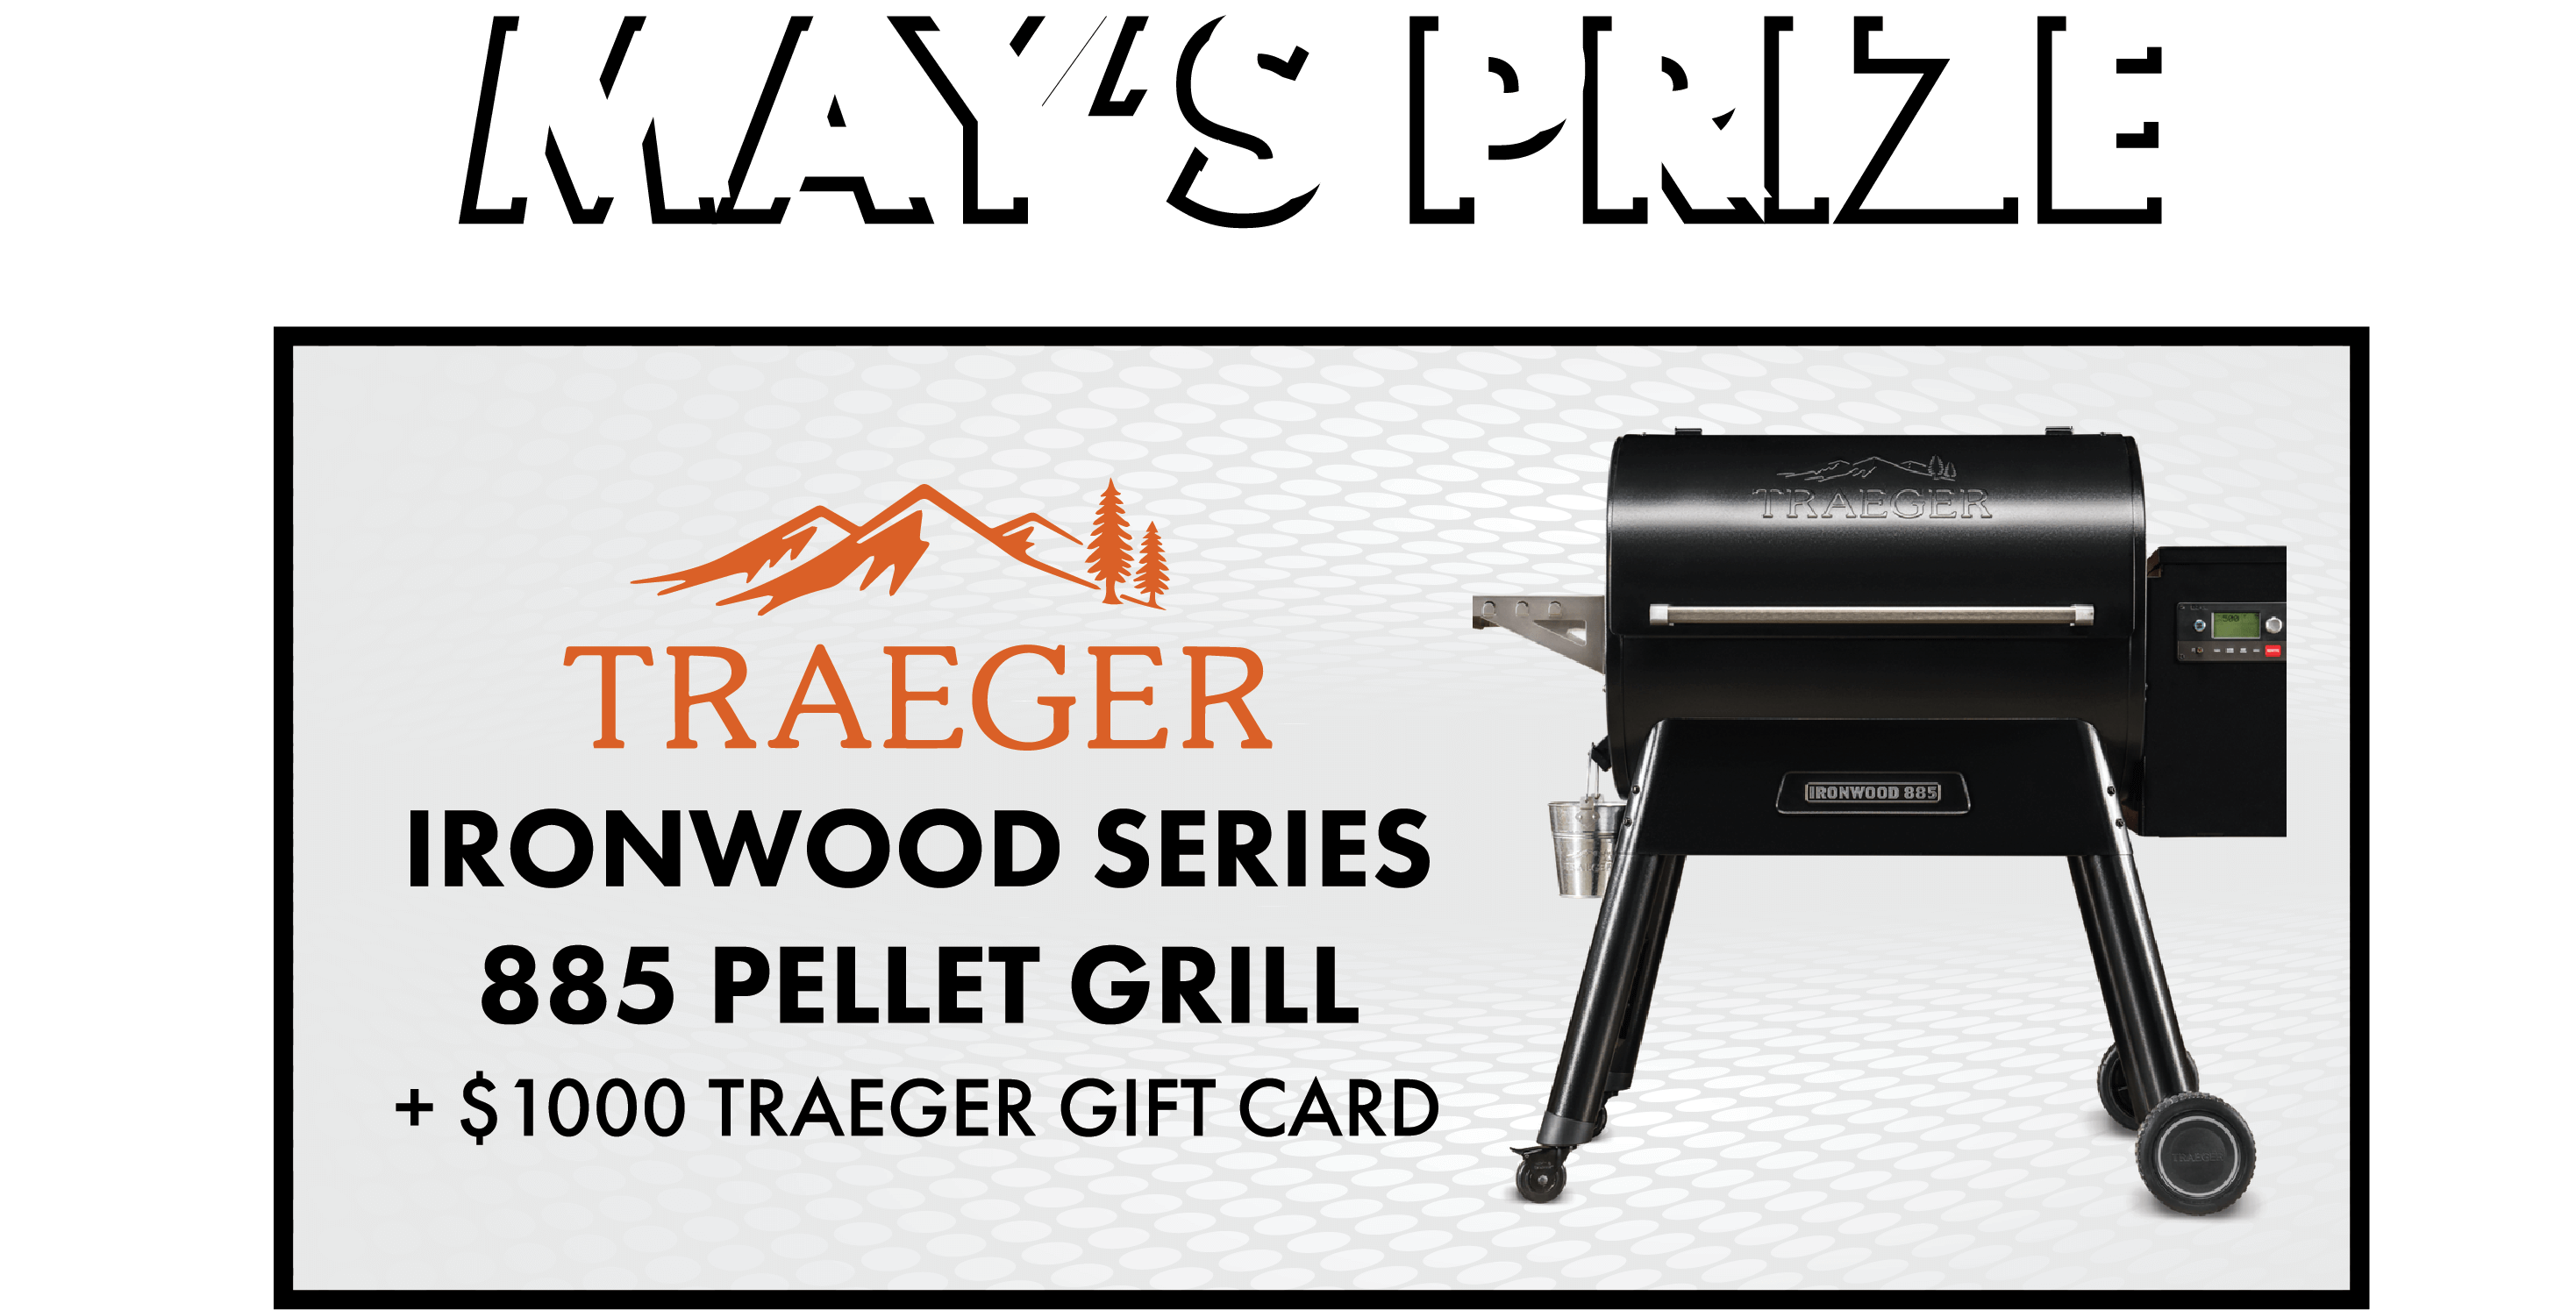 May's prize is a Traeger Ironwood Series 885 Pellet Grill and a $1000 Traeger Gift Card!